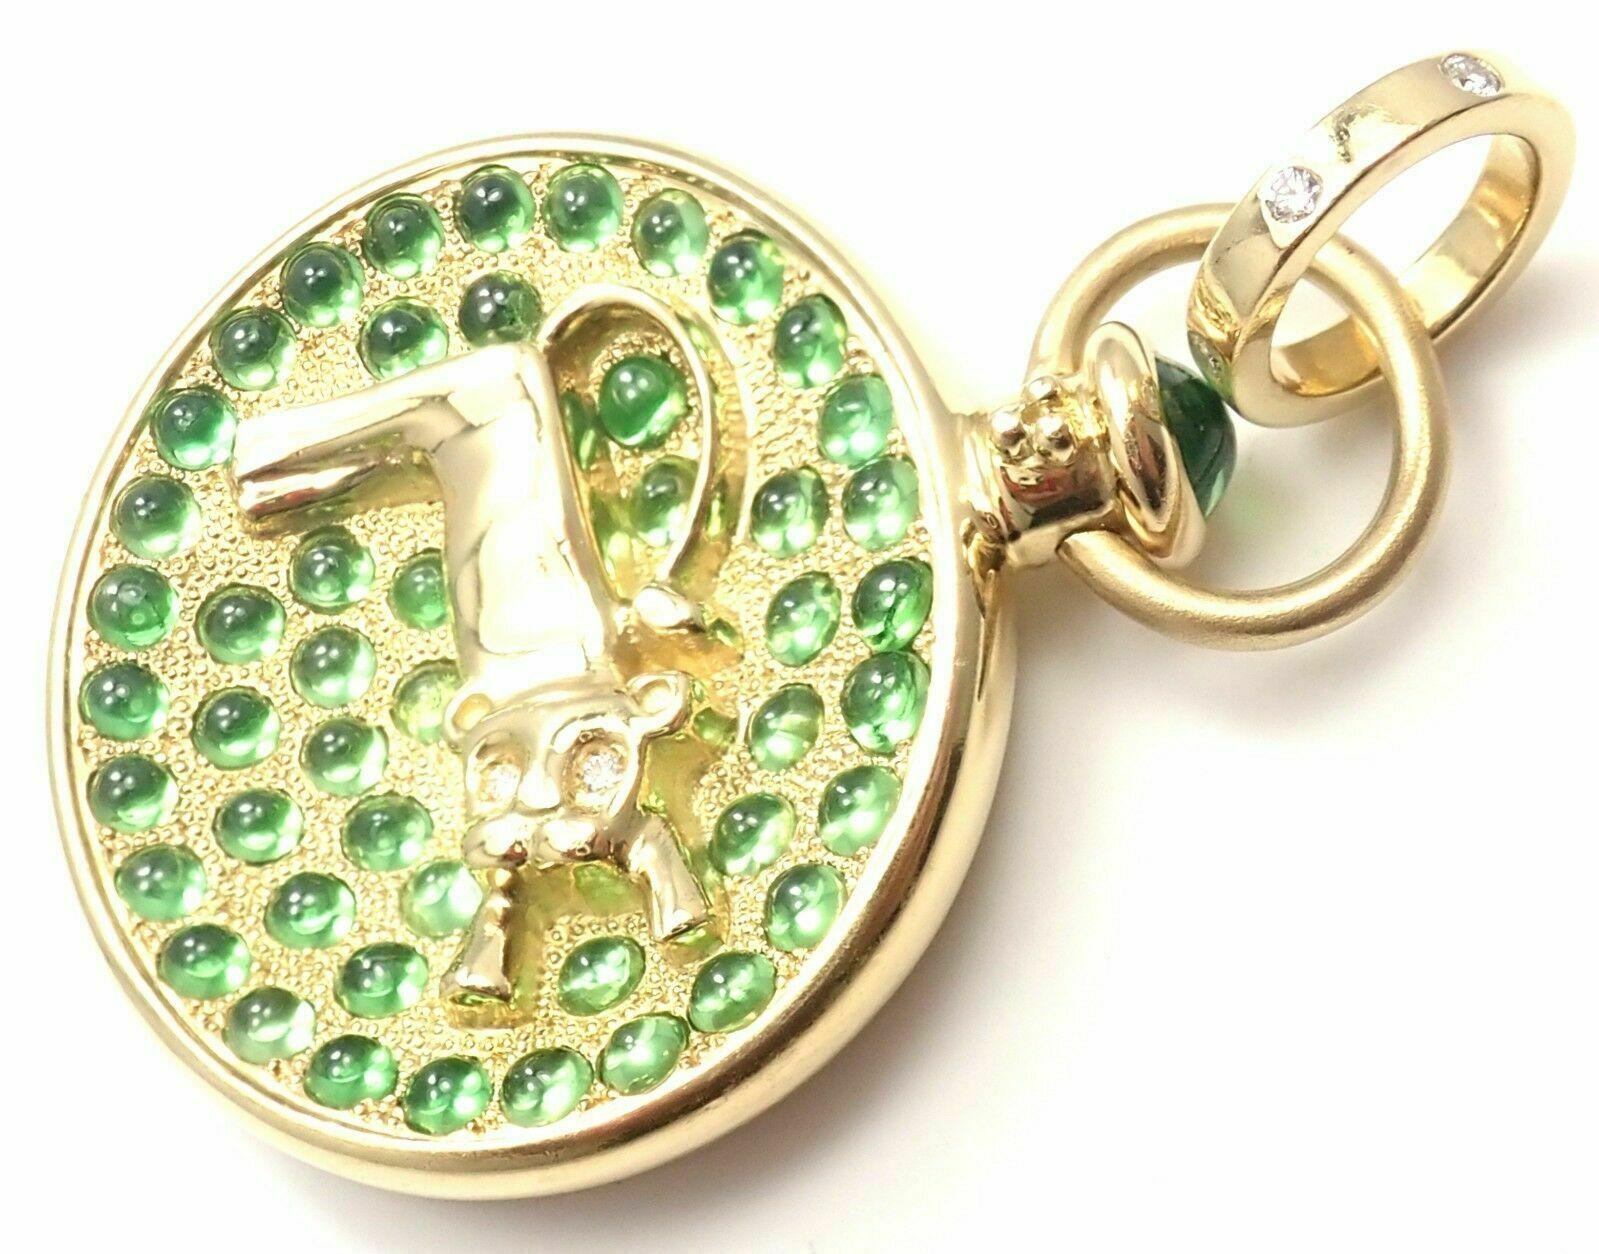 18k Yellow Gold Diamond Tsavorite Garnet Terrae Lion Charm Pendant by Temple St Clair. 
This piece comes with a pouch. 
With Round Diamonds total weight (0.13ct) and Tsavorite: 4.3 ct
Details: 
Measurements: 31mm in diameter and 47mm in length with